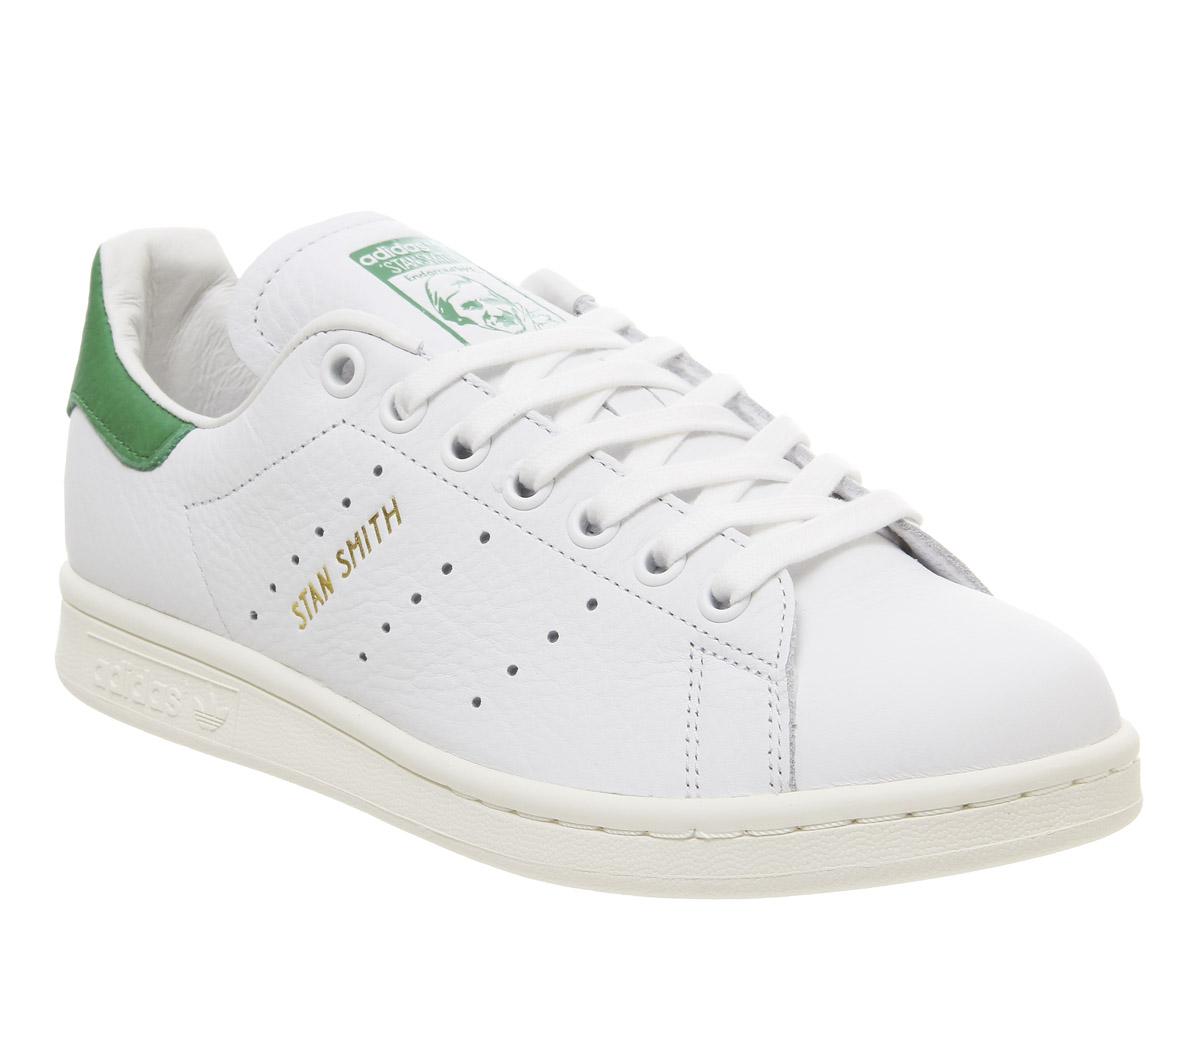 stan smith stan forever